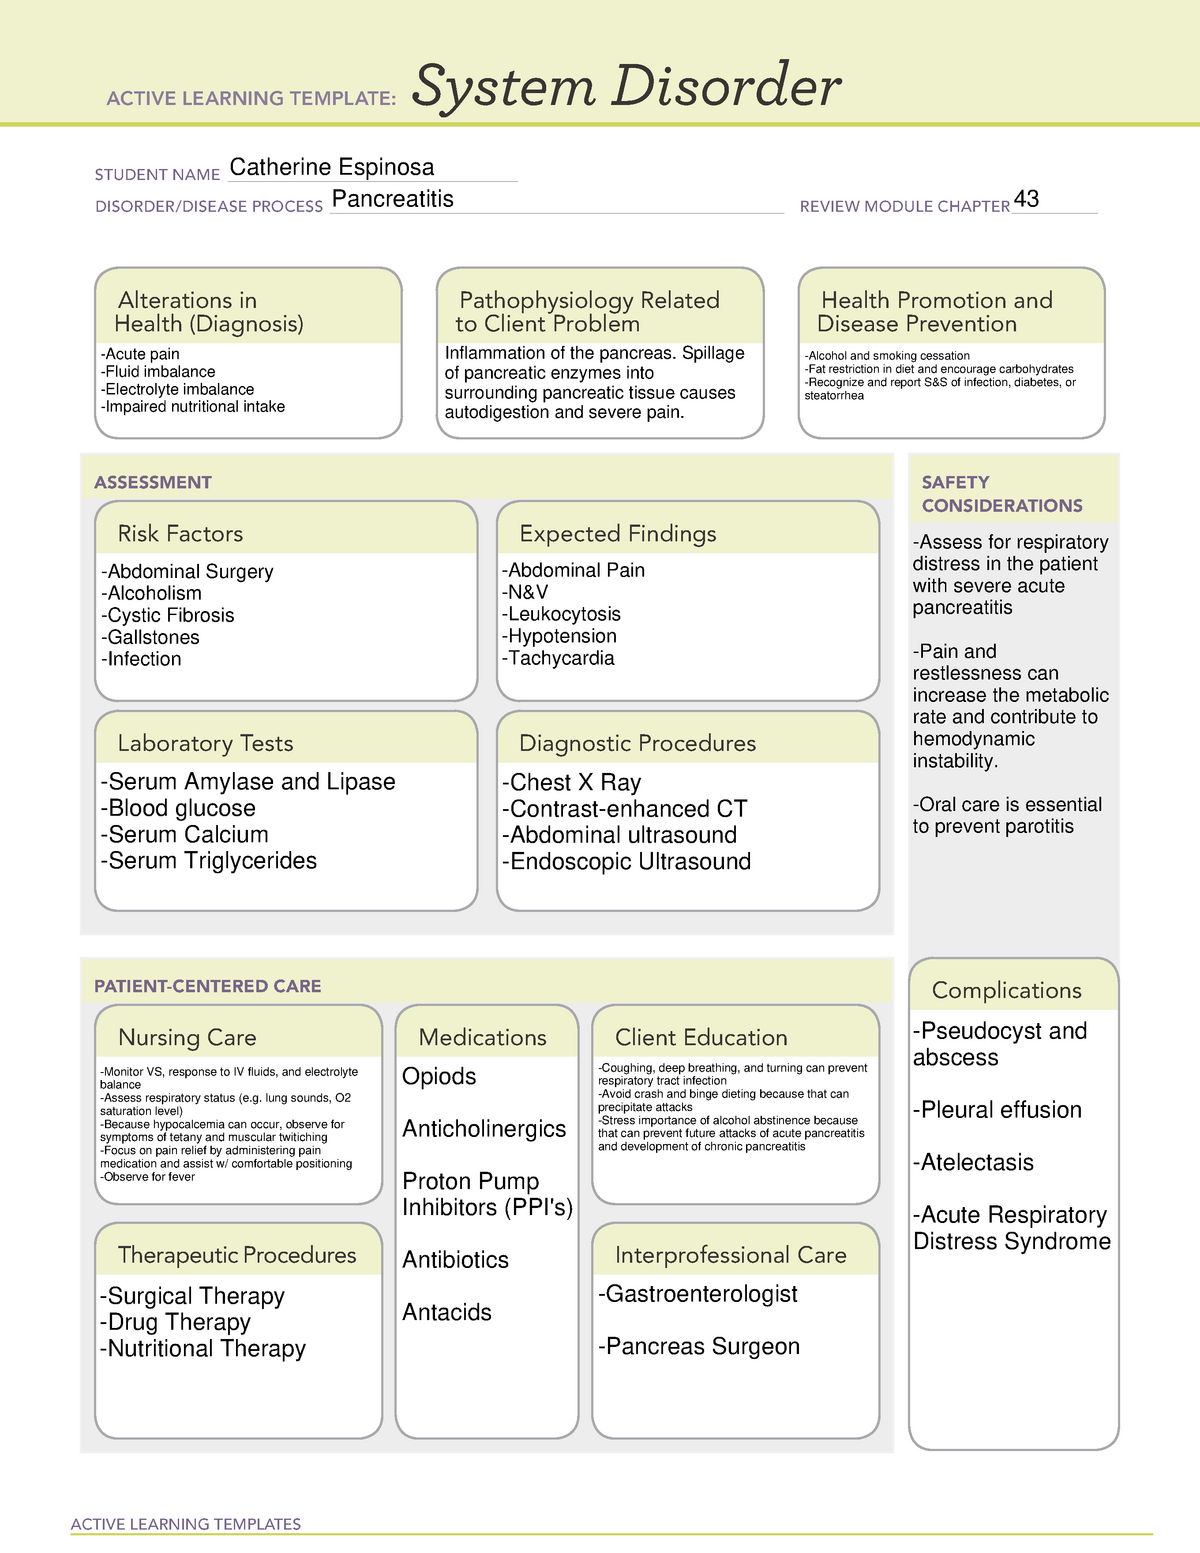 Pancreatitis System Disorder - ACTIVE LEARNING TEMPLATES System ...